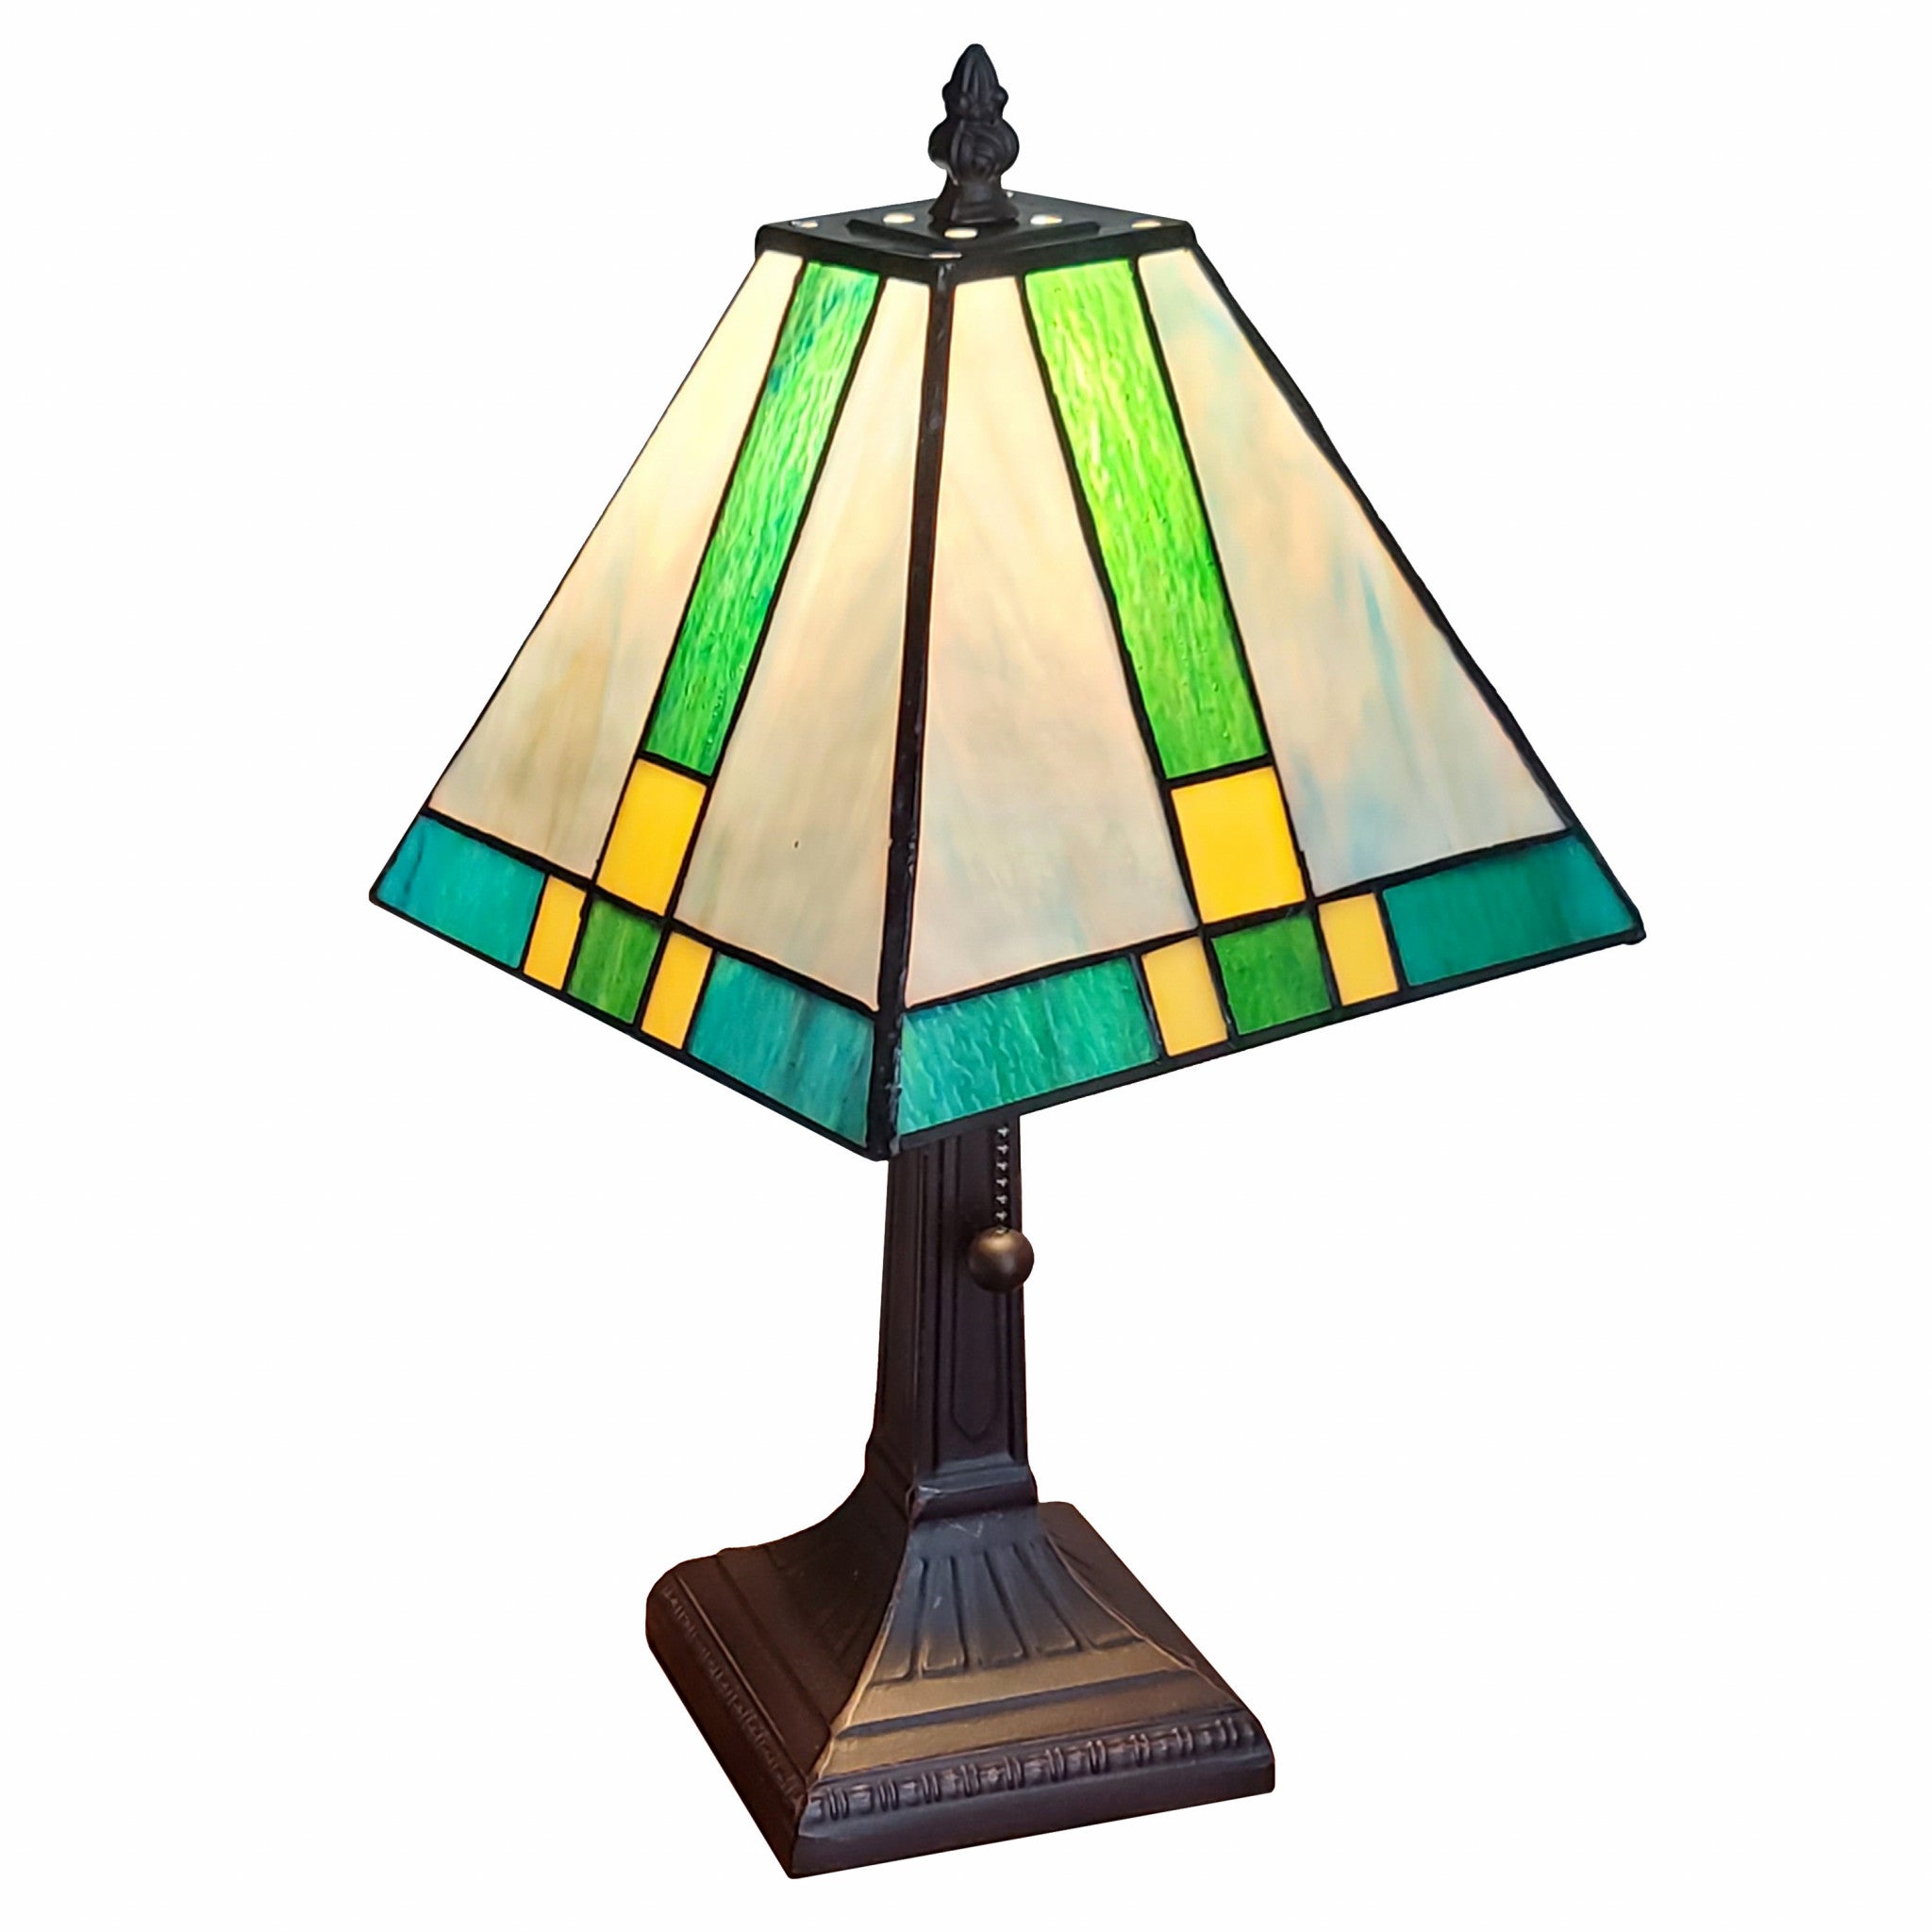 15" Dark Brown Metal Candlestick Table Lamp With Green Shade